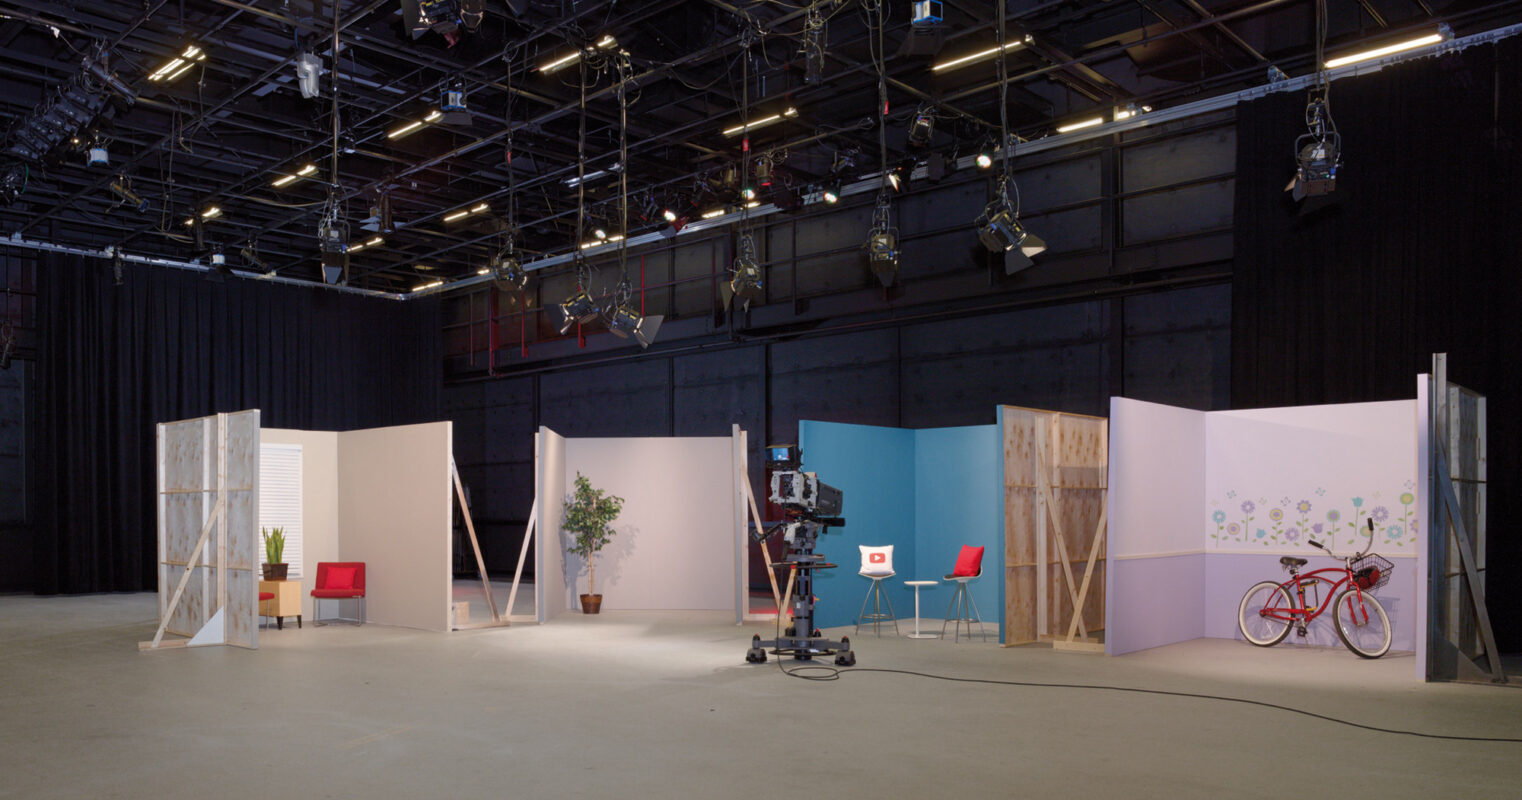 A spacious broadcast studio with high ceilings, equipped with professional lighting rigs and a variety of set pieces including walls, furniture, and props for versatile scene setups.